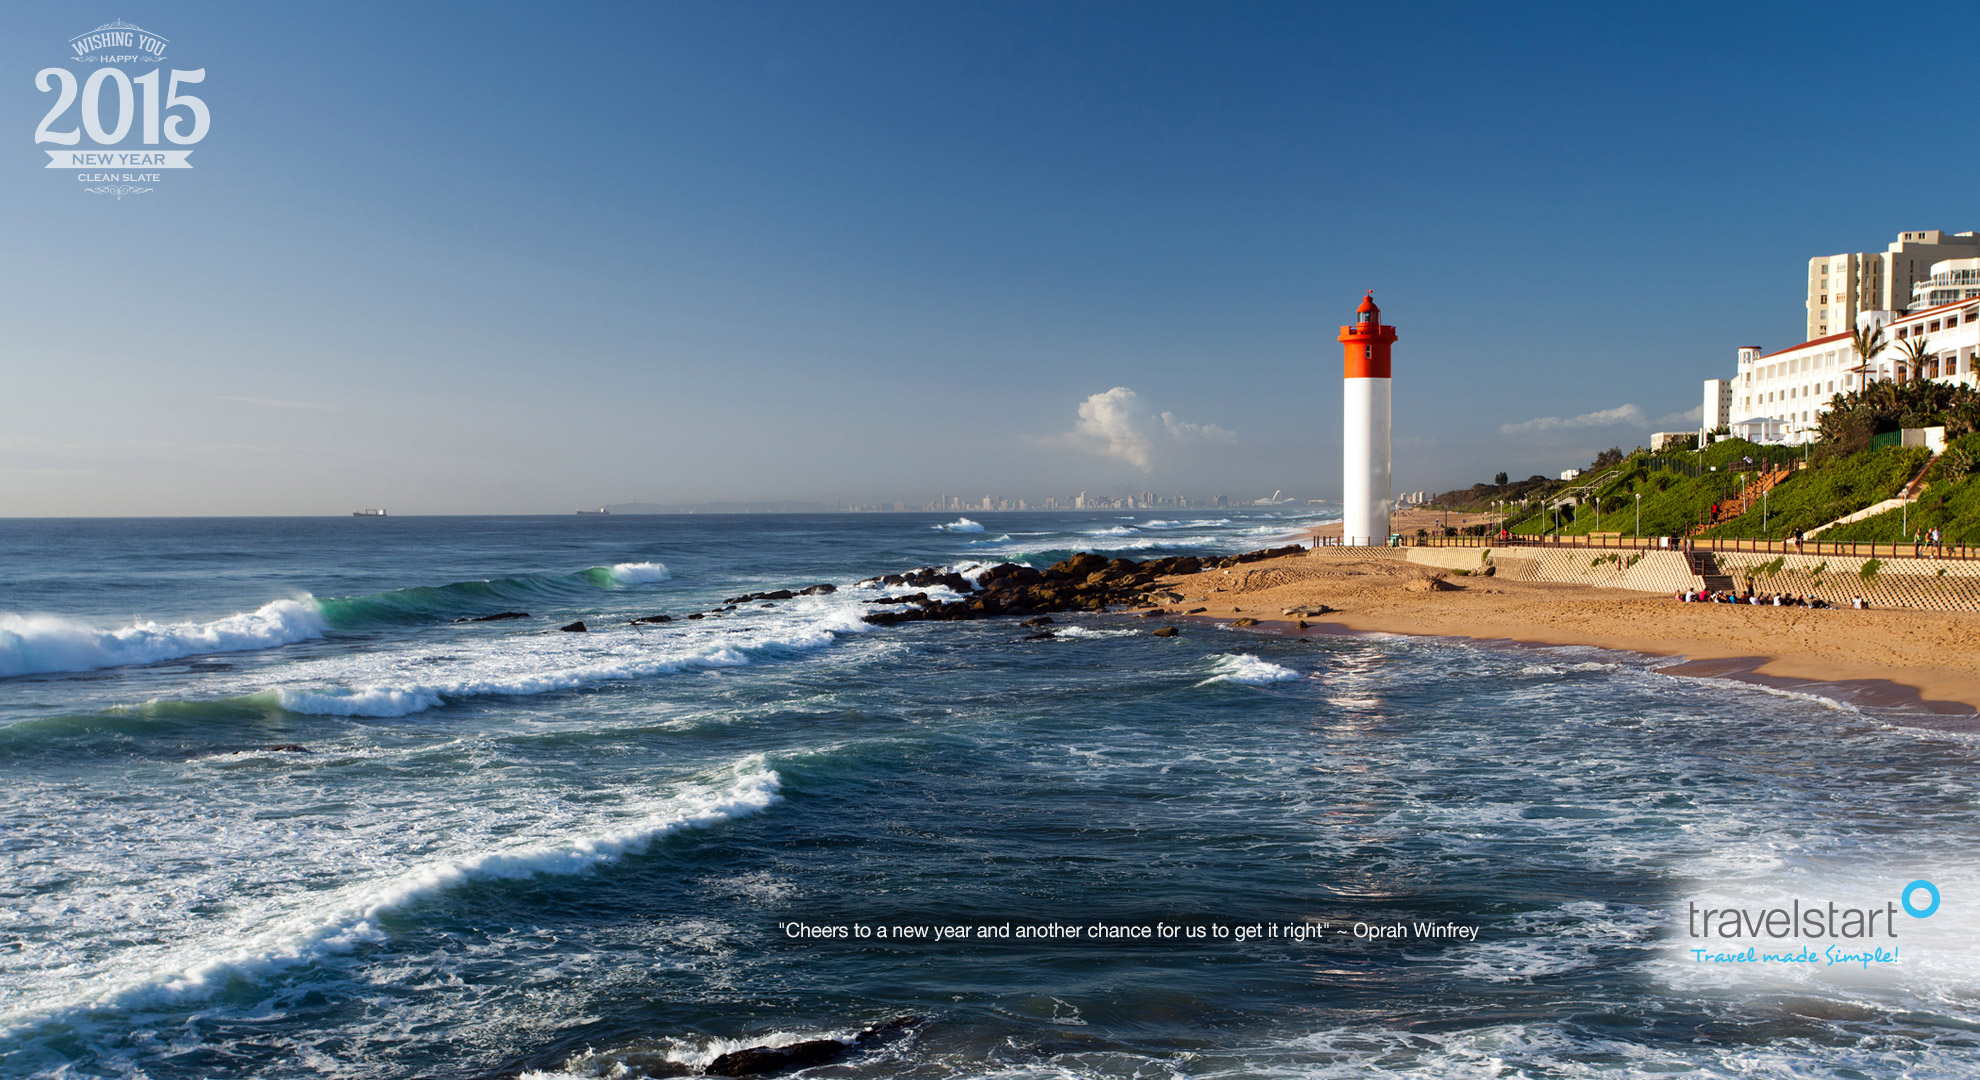 Download your free January 2015 wallpaper calendar featuring the Umhlanga Lighthouse near Durban.